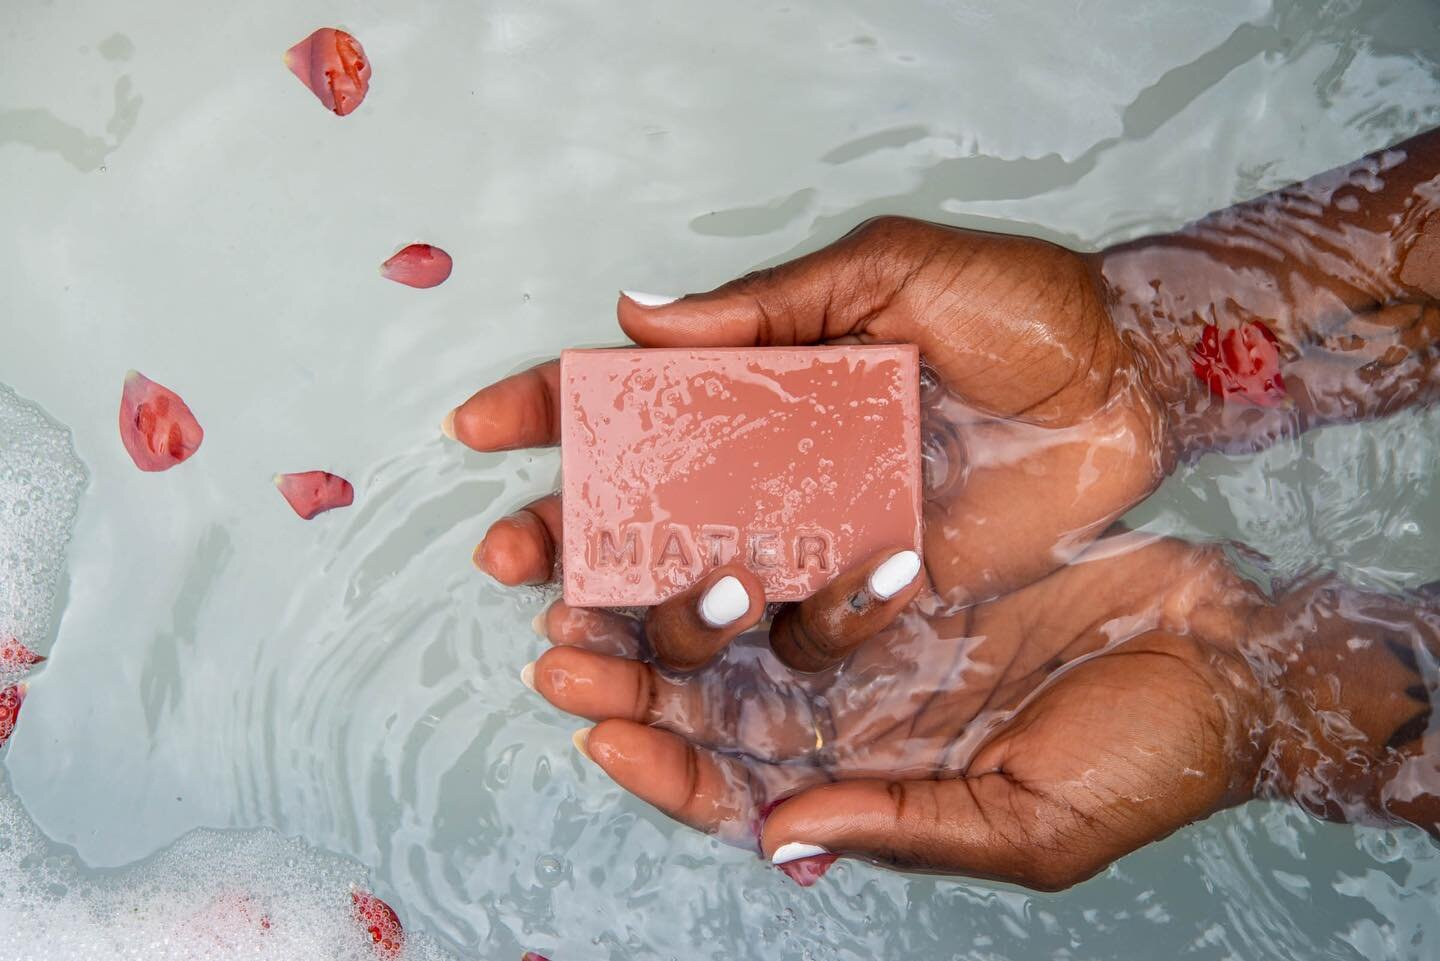 With every use, soap becomes a document of its purpose. The bather is like a sculptor, using their body to dissipate and shape the material through the intimate act of caring for oneself.🌹🥀 📸 @jerseywalz